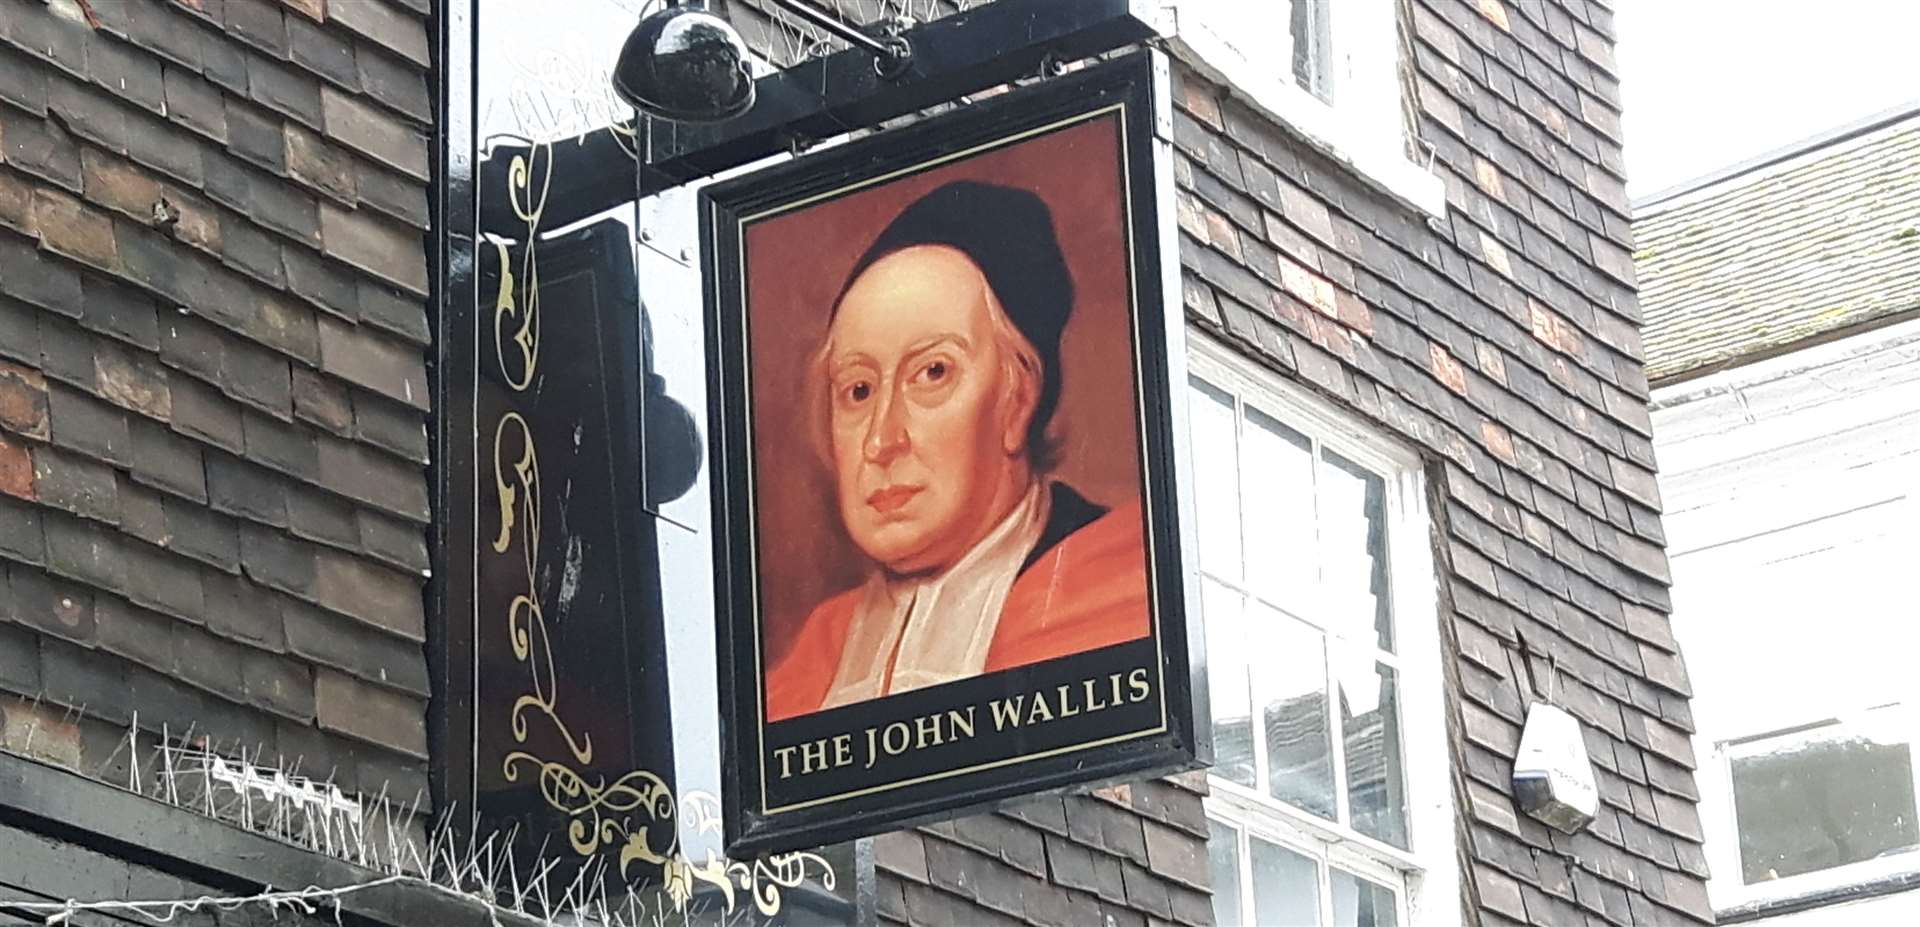 The pub was previously called The Man of Kent